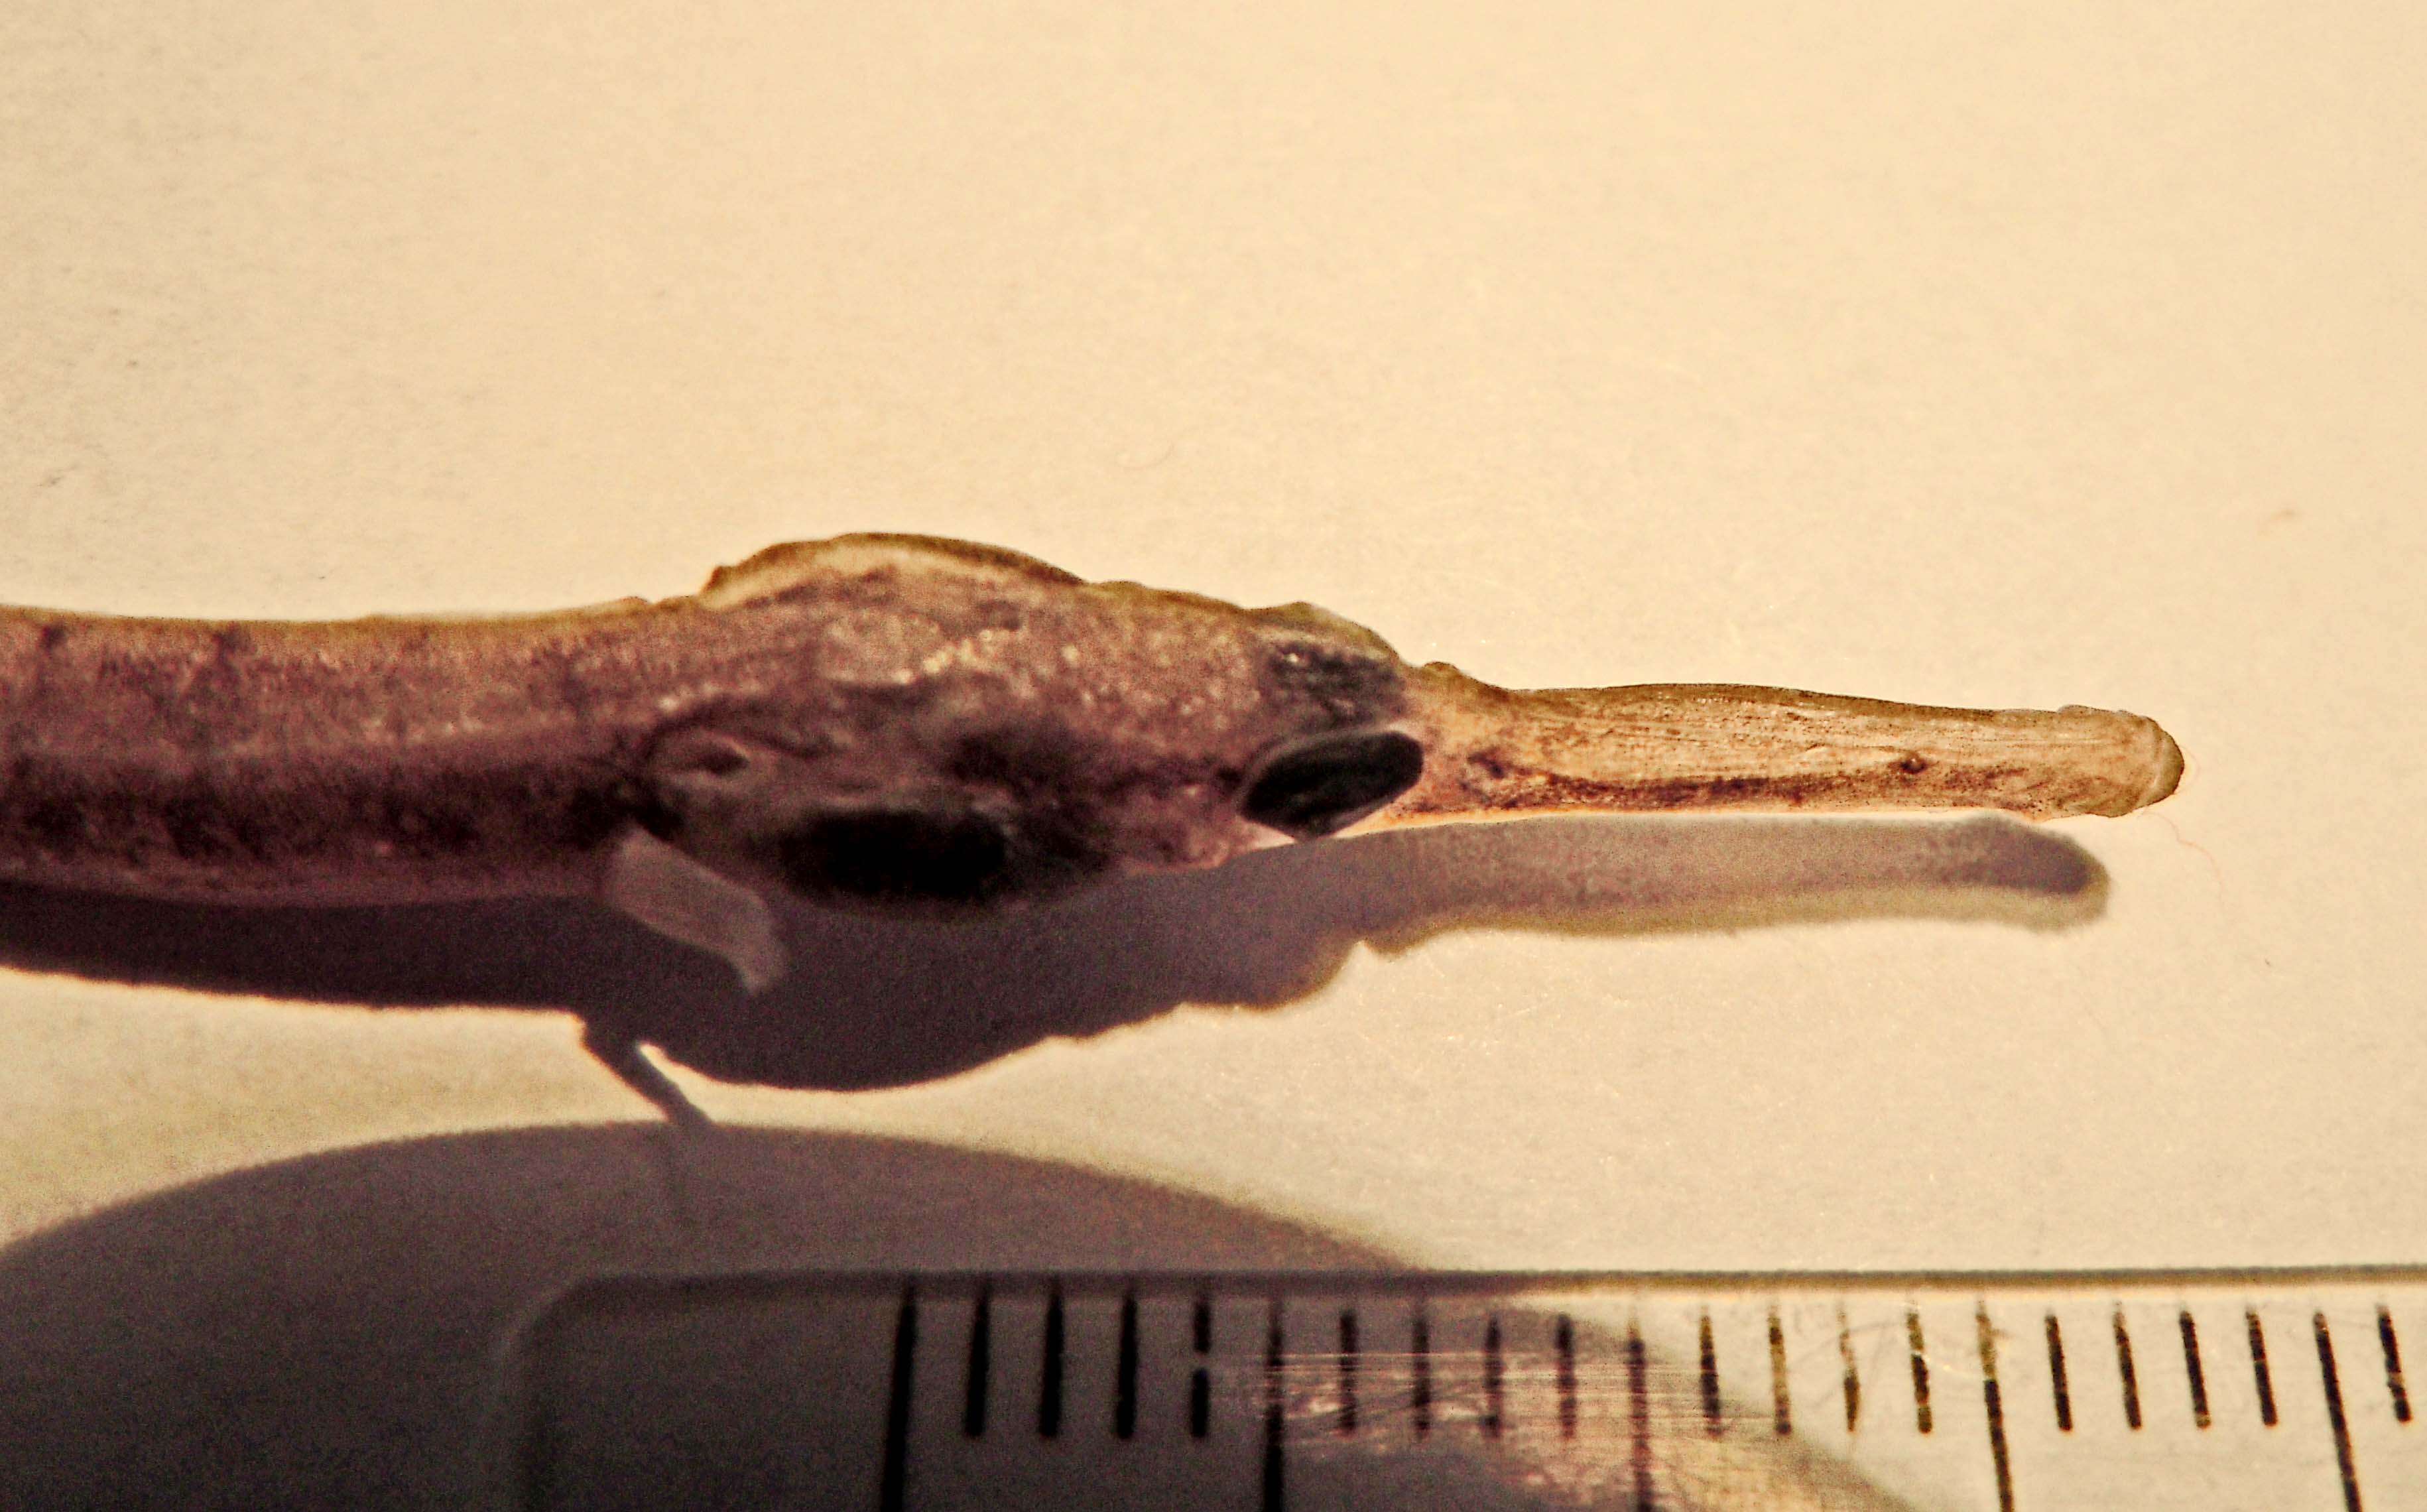 Image of Narrow-snouted Pipefish